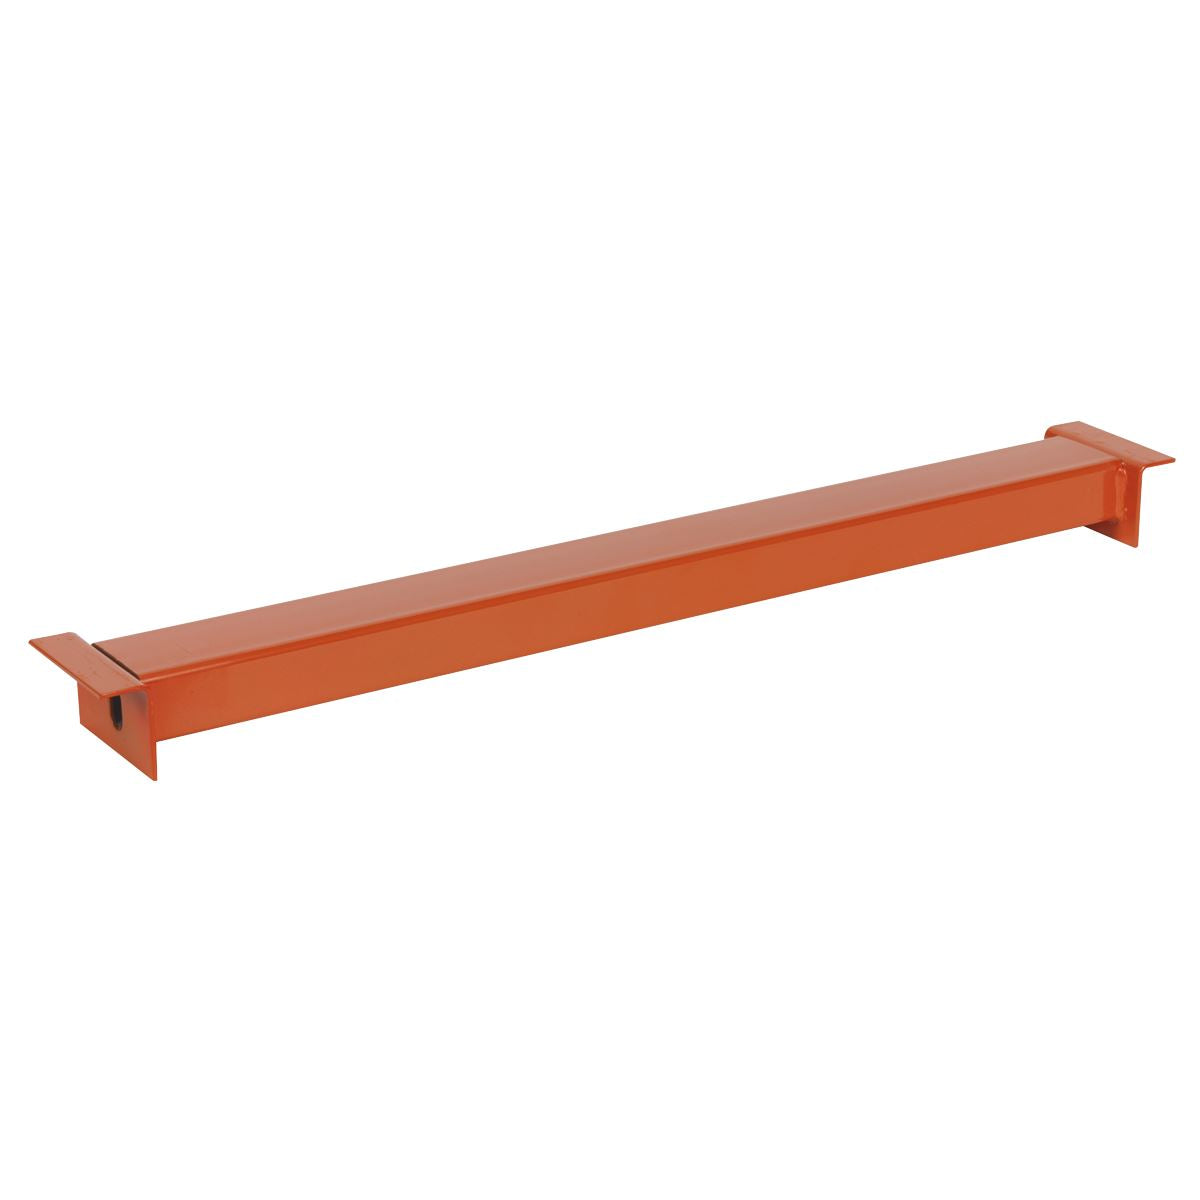 Sealey Shelving Panel Support 600mm